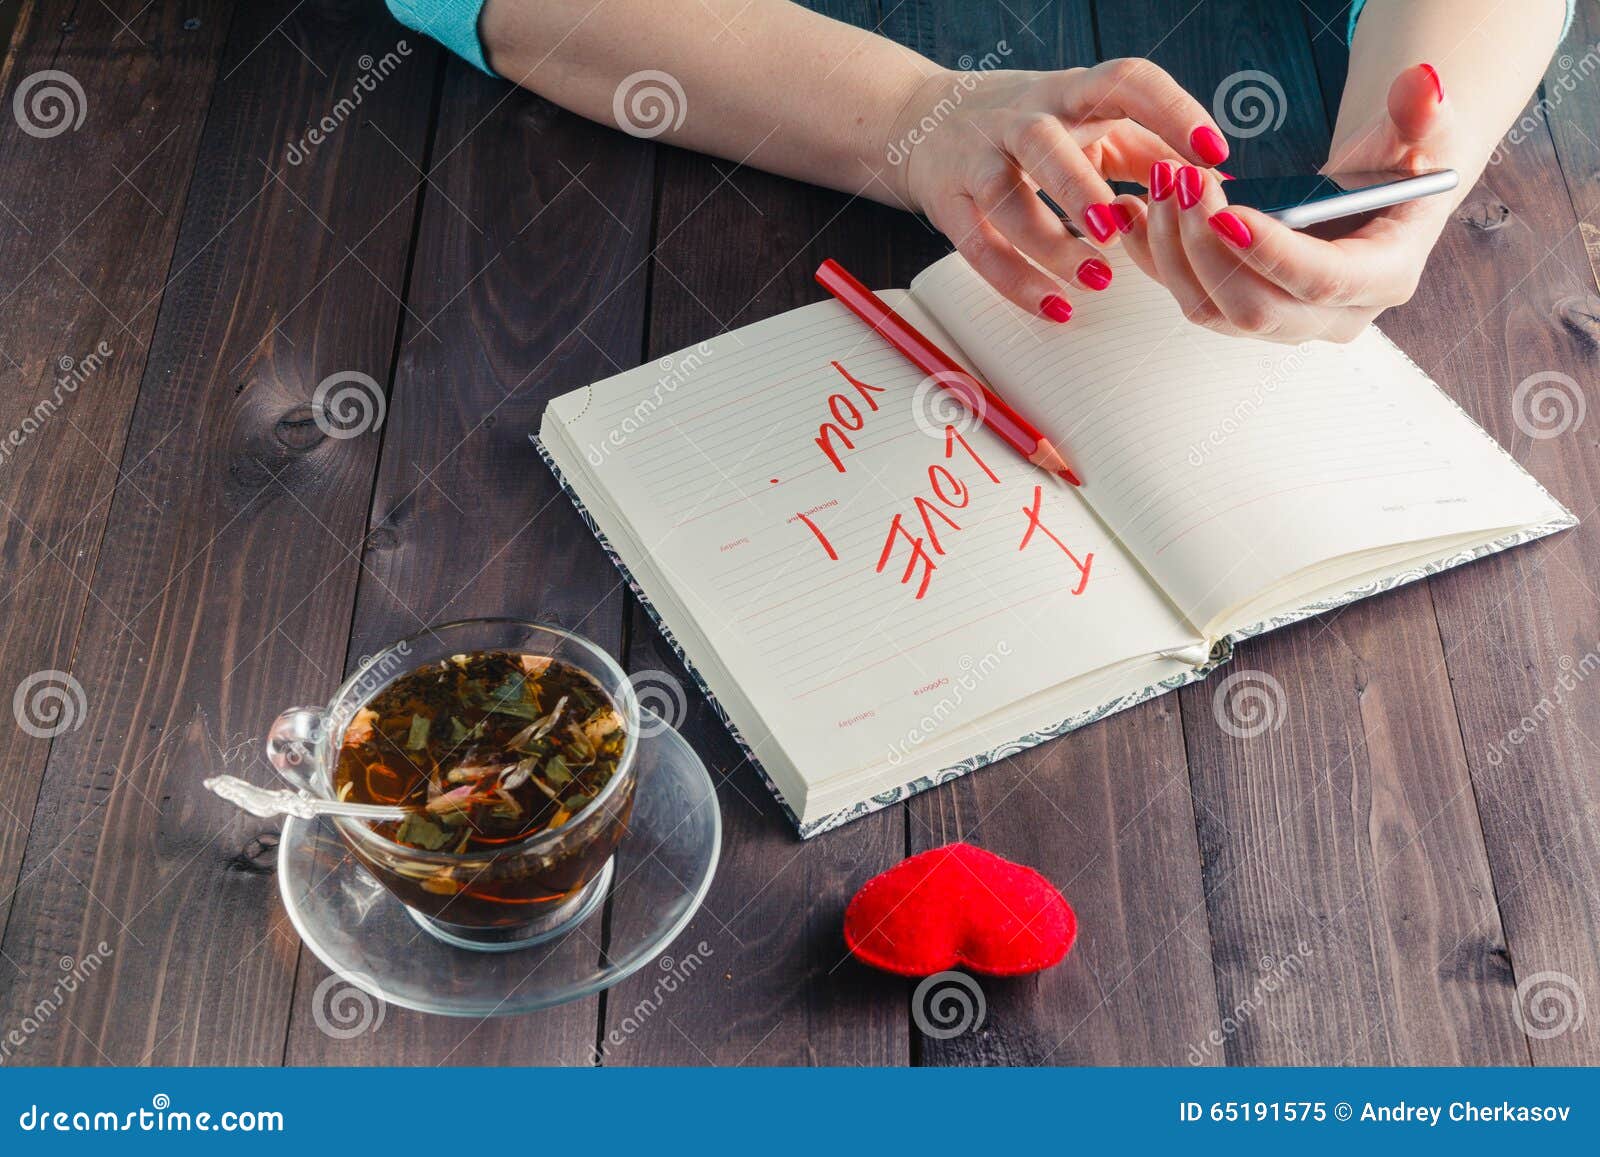 Famale write love sms stock image. Image of notepad, closeup